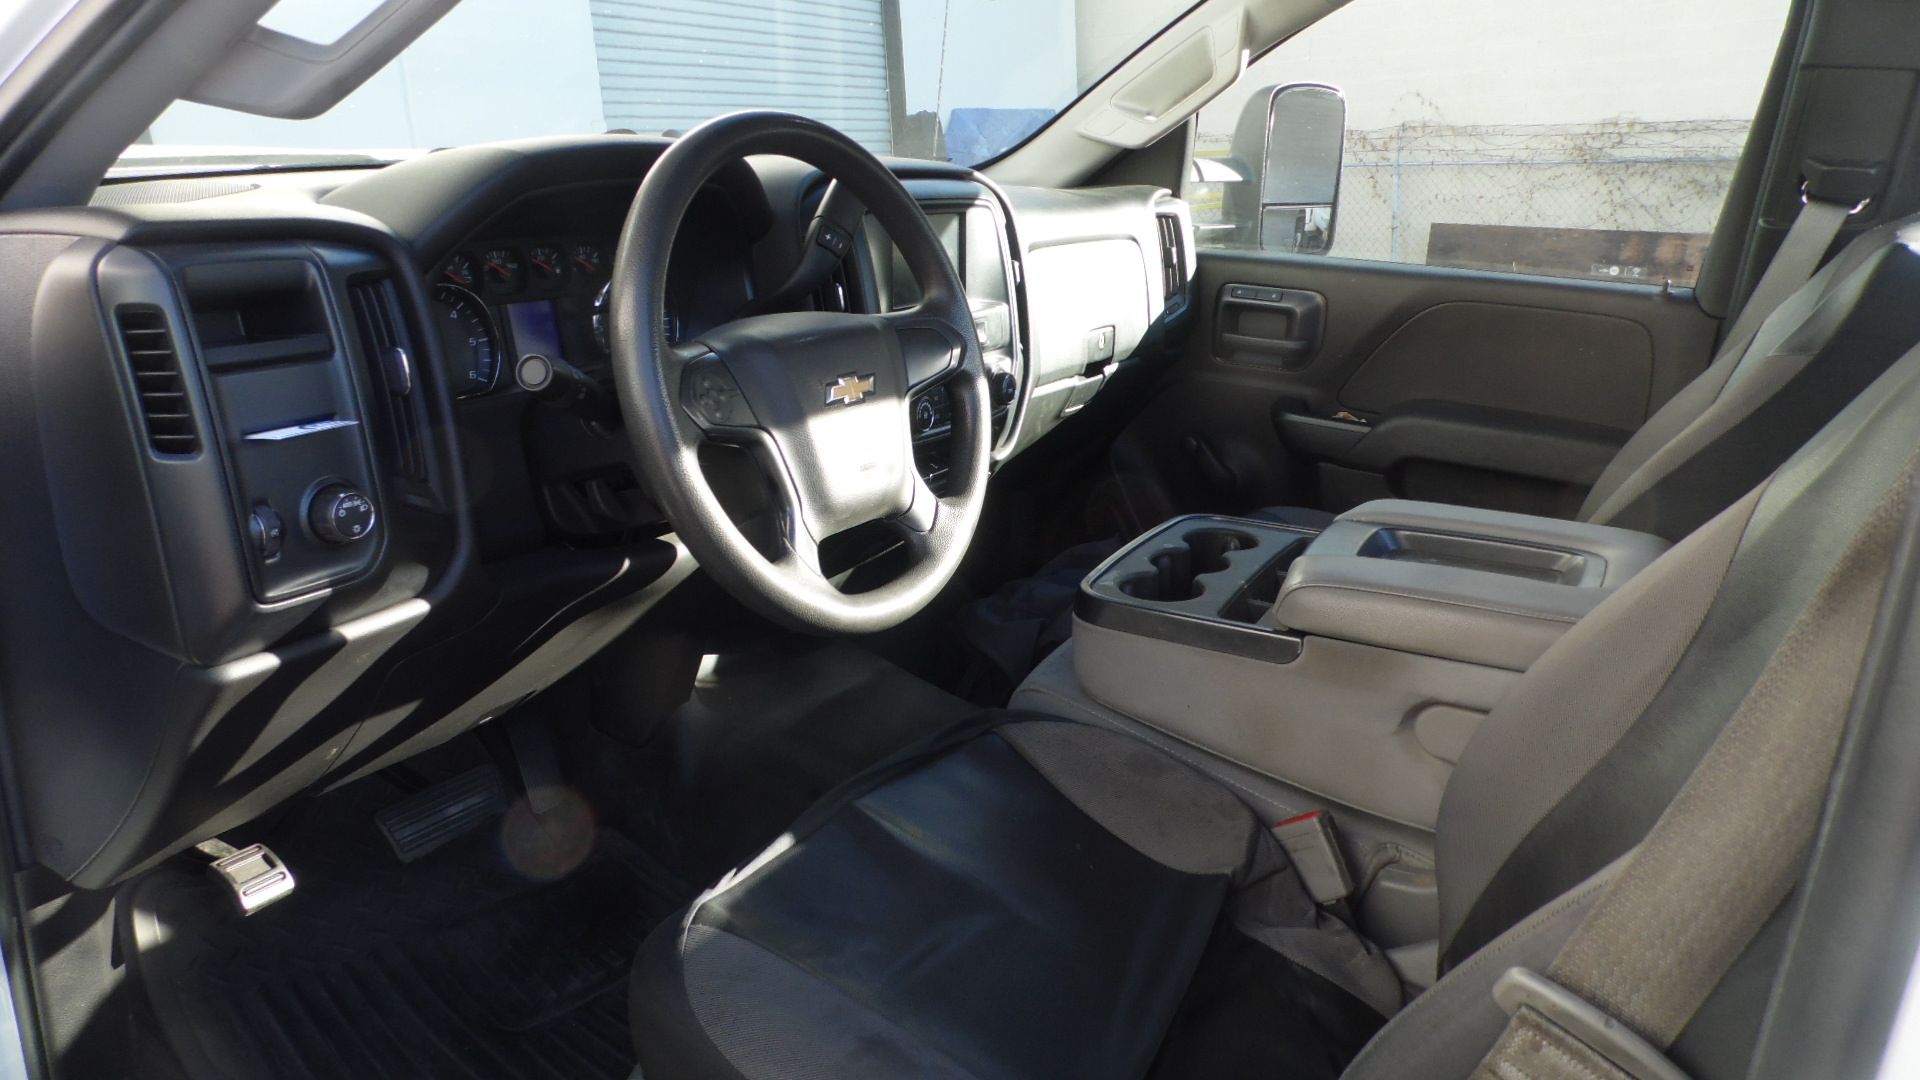 2016 CHEVY UTILITY BEDTRUCK (93,305 MILES) - Image 4 of 4